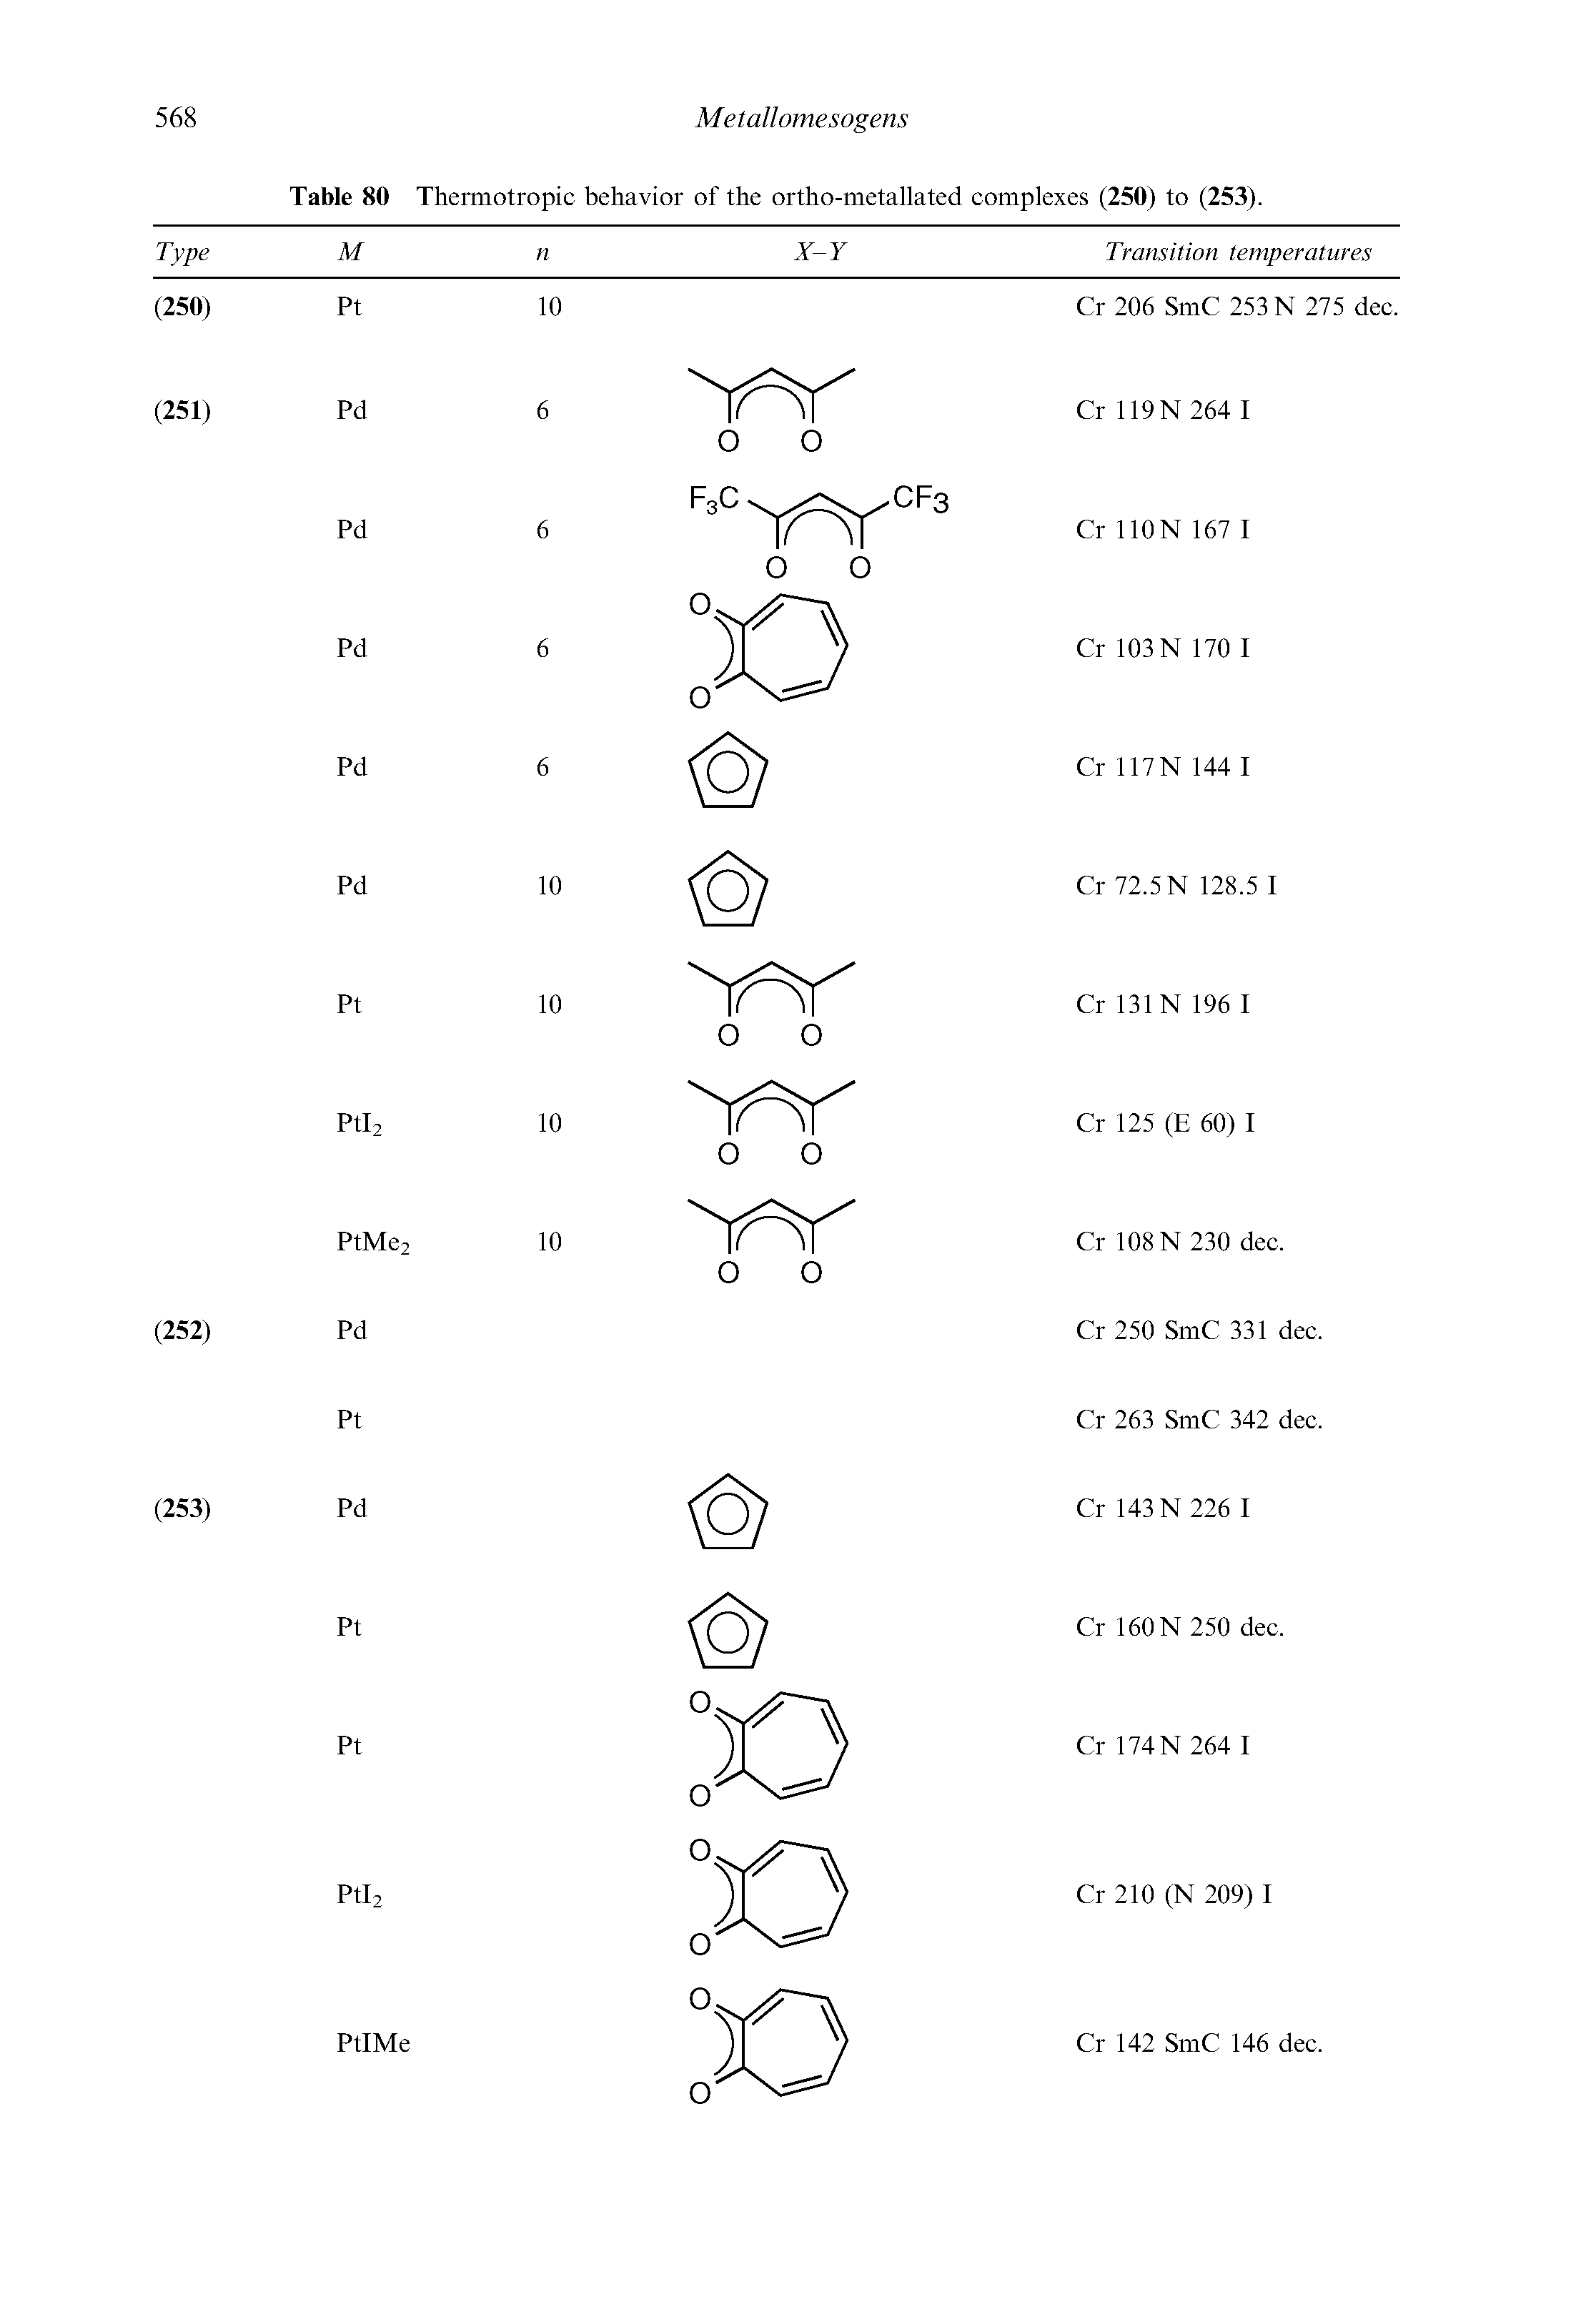 Table 80 Thermotropic behavior of the ortho-metallated complexes (250) to (253).